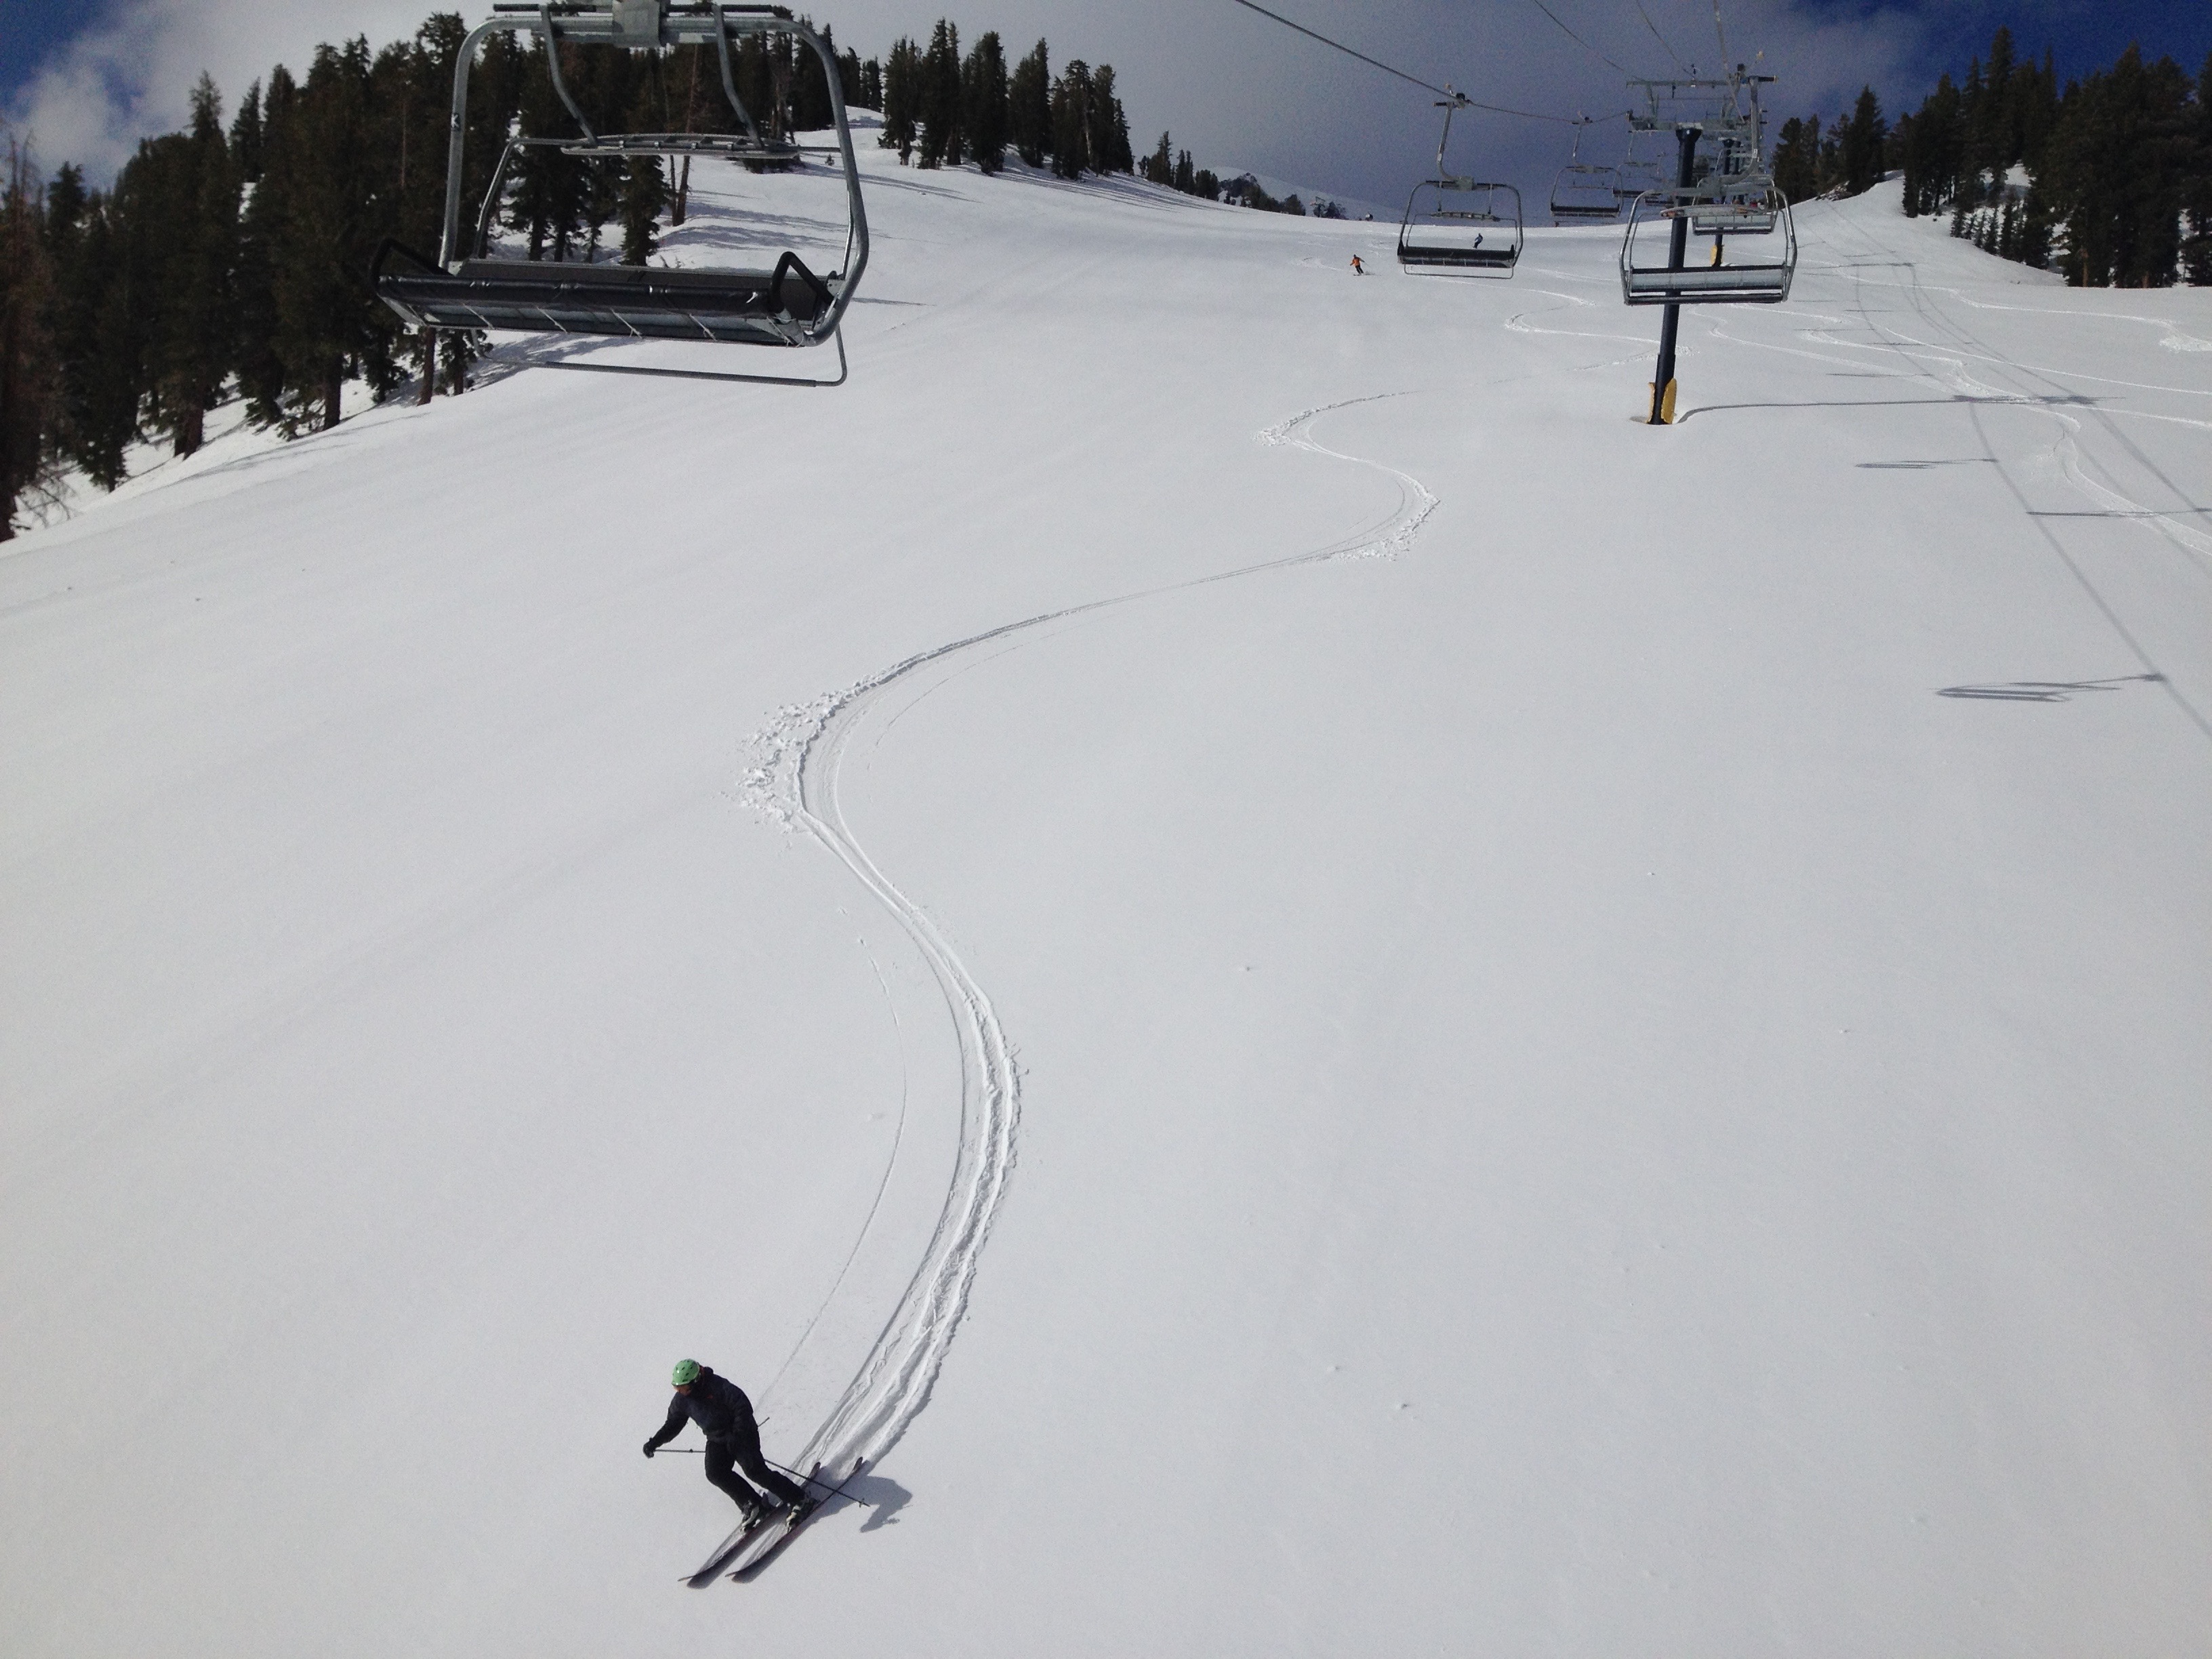 Lower mountain pow on groomer at 8:30am on Friday. photo: snowbrains